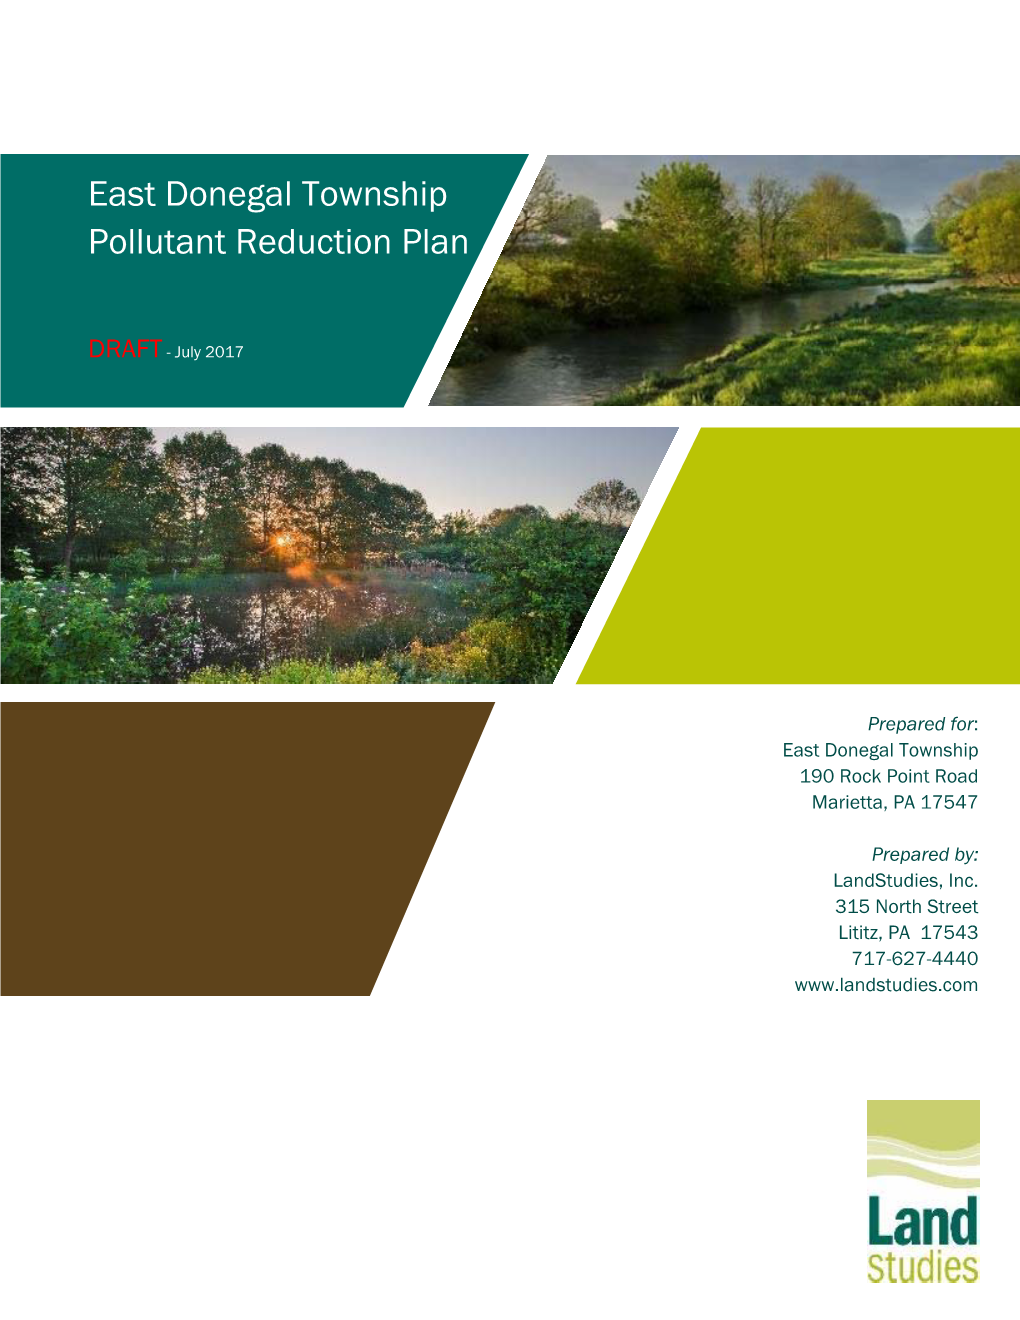 East Donegal Township Pollutant Reduction Plan Draft - July 2017